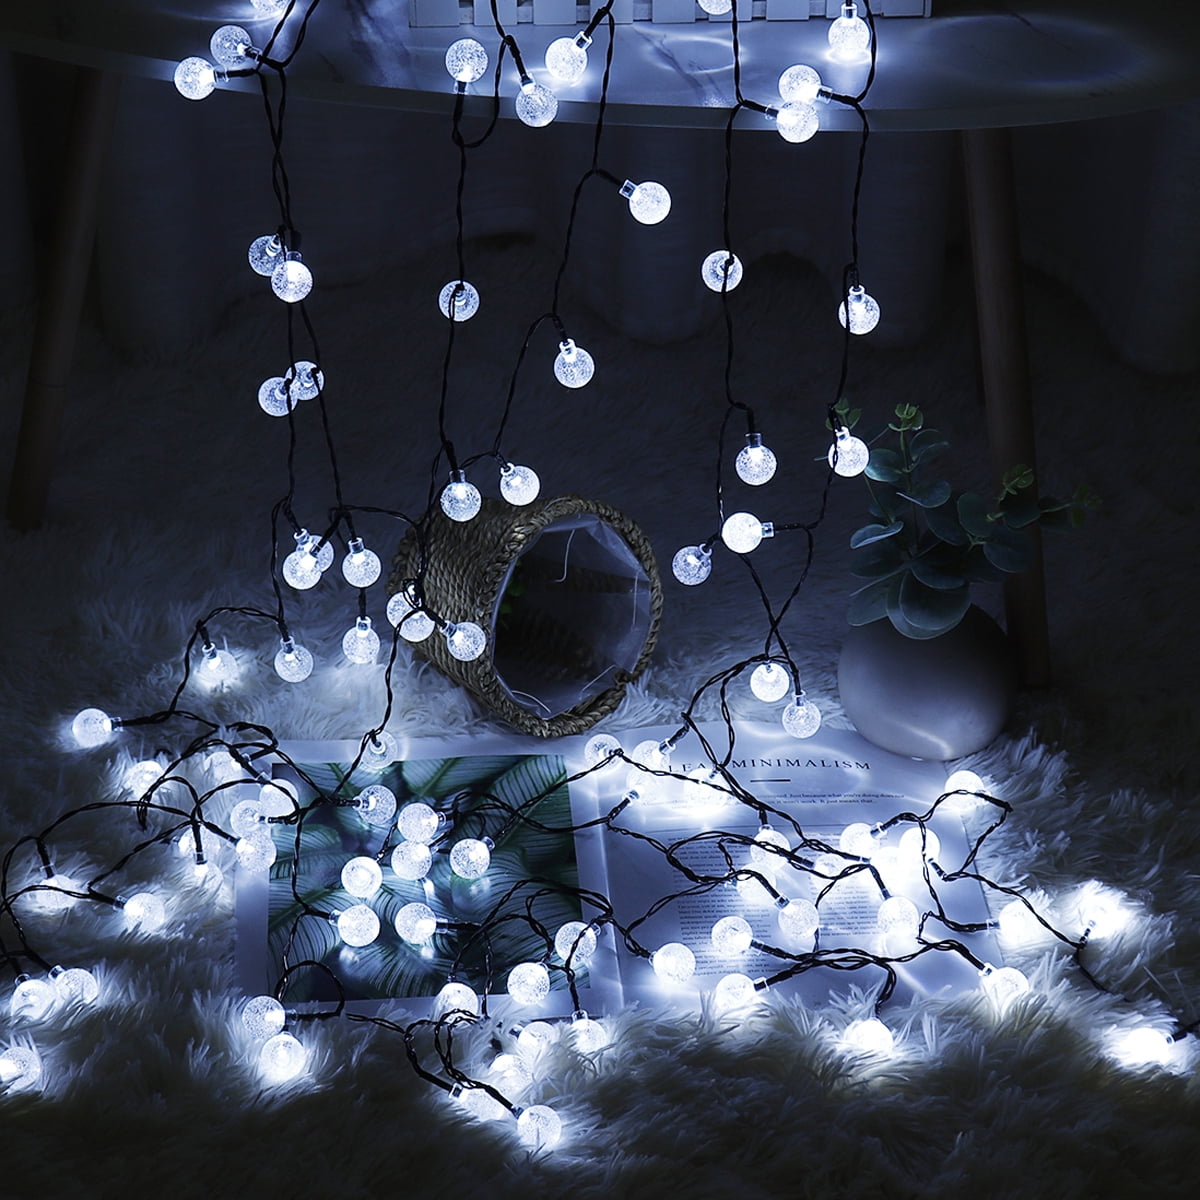 Details about   Solar Powered 60 LED String Light Home Garden Waterproof Lamp Outdoor Decor Set 